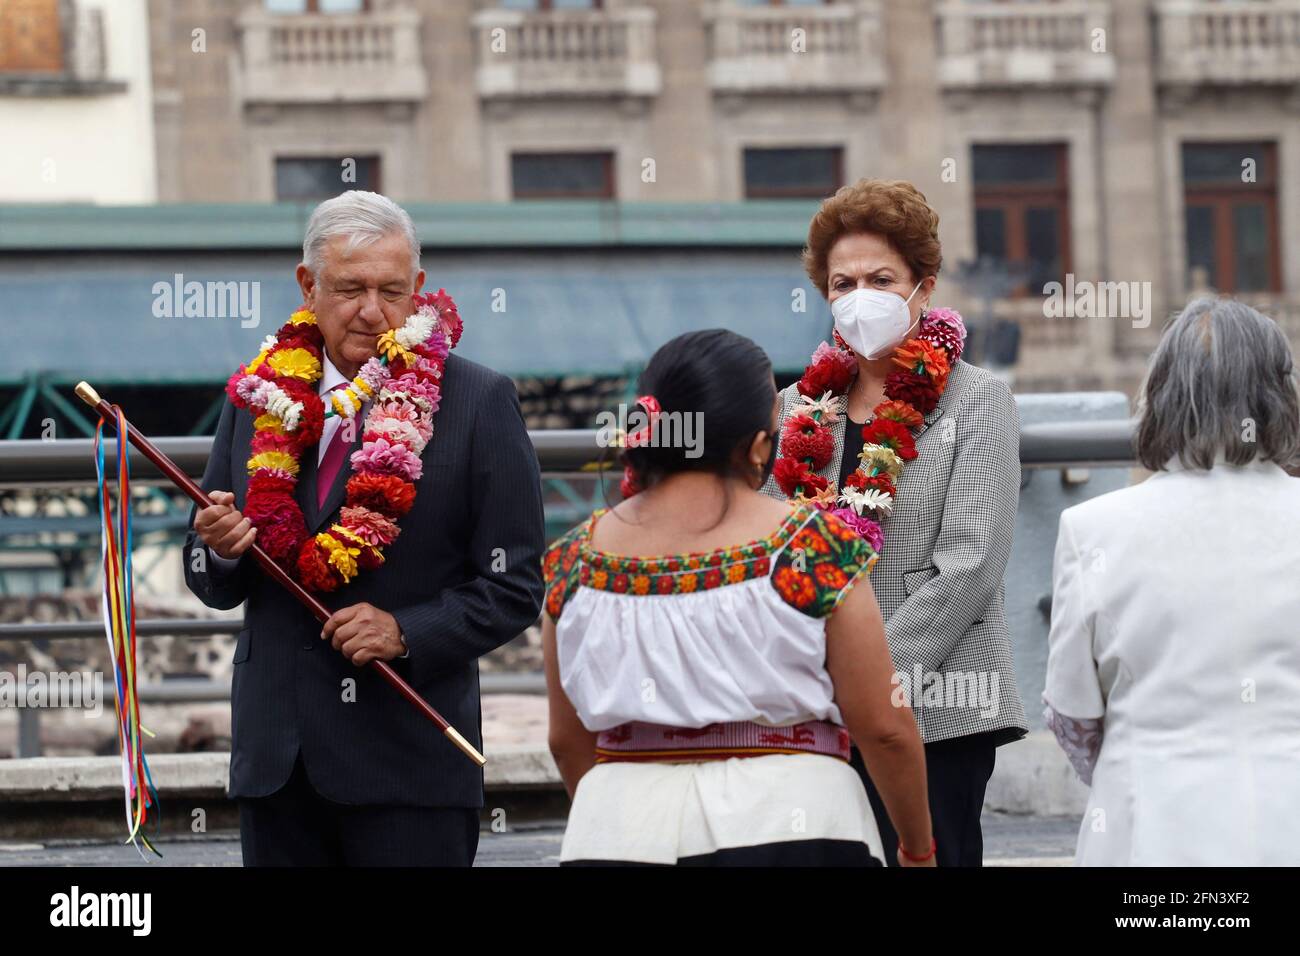 Mexico City, Mexico. 13th May, 2021. Mexico's President, Andres Manuel Lopez Obrador, accompanied by the former president of Brazil, Dilma Rousseff, during the ceremony 'Mexico - Tenochtitlan, more than seven centuries of history' at the Museo del Templo Mayor on May 13, 2021 in Mexico City, Mexico. Photo by Luis Barron/Eyepix/ABACAPRESS.COM Credit: Abaca Press/Alamy Live News Stock Photo